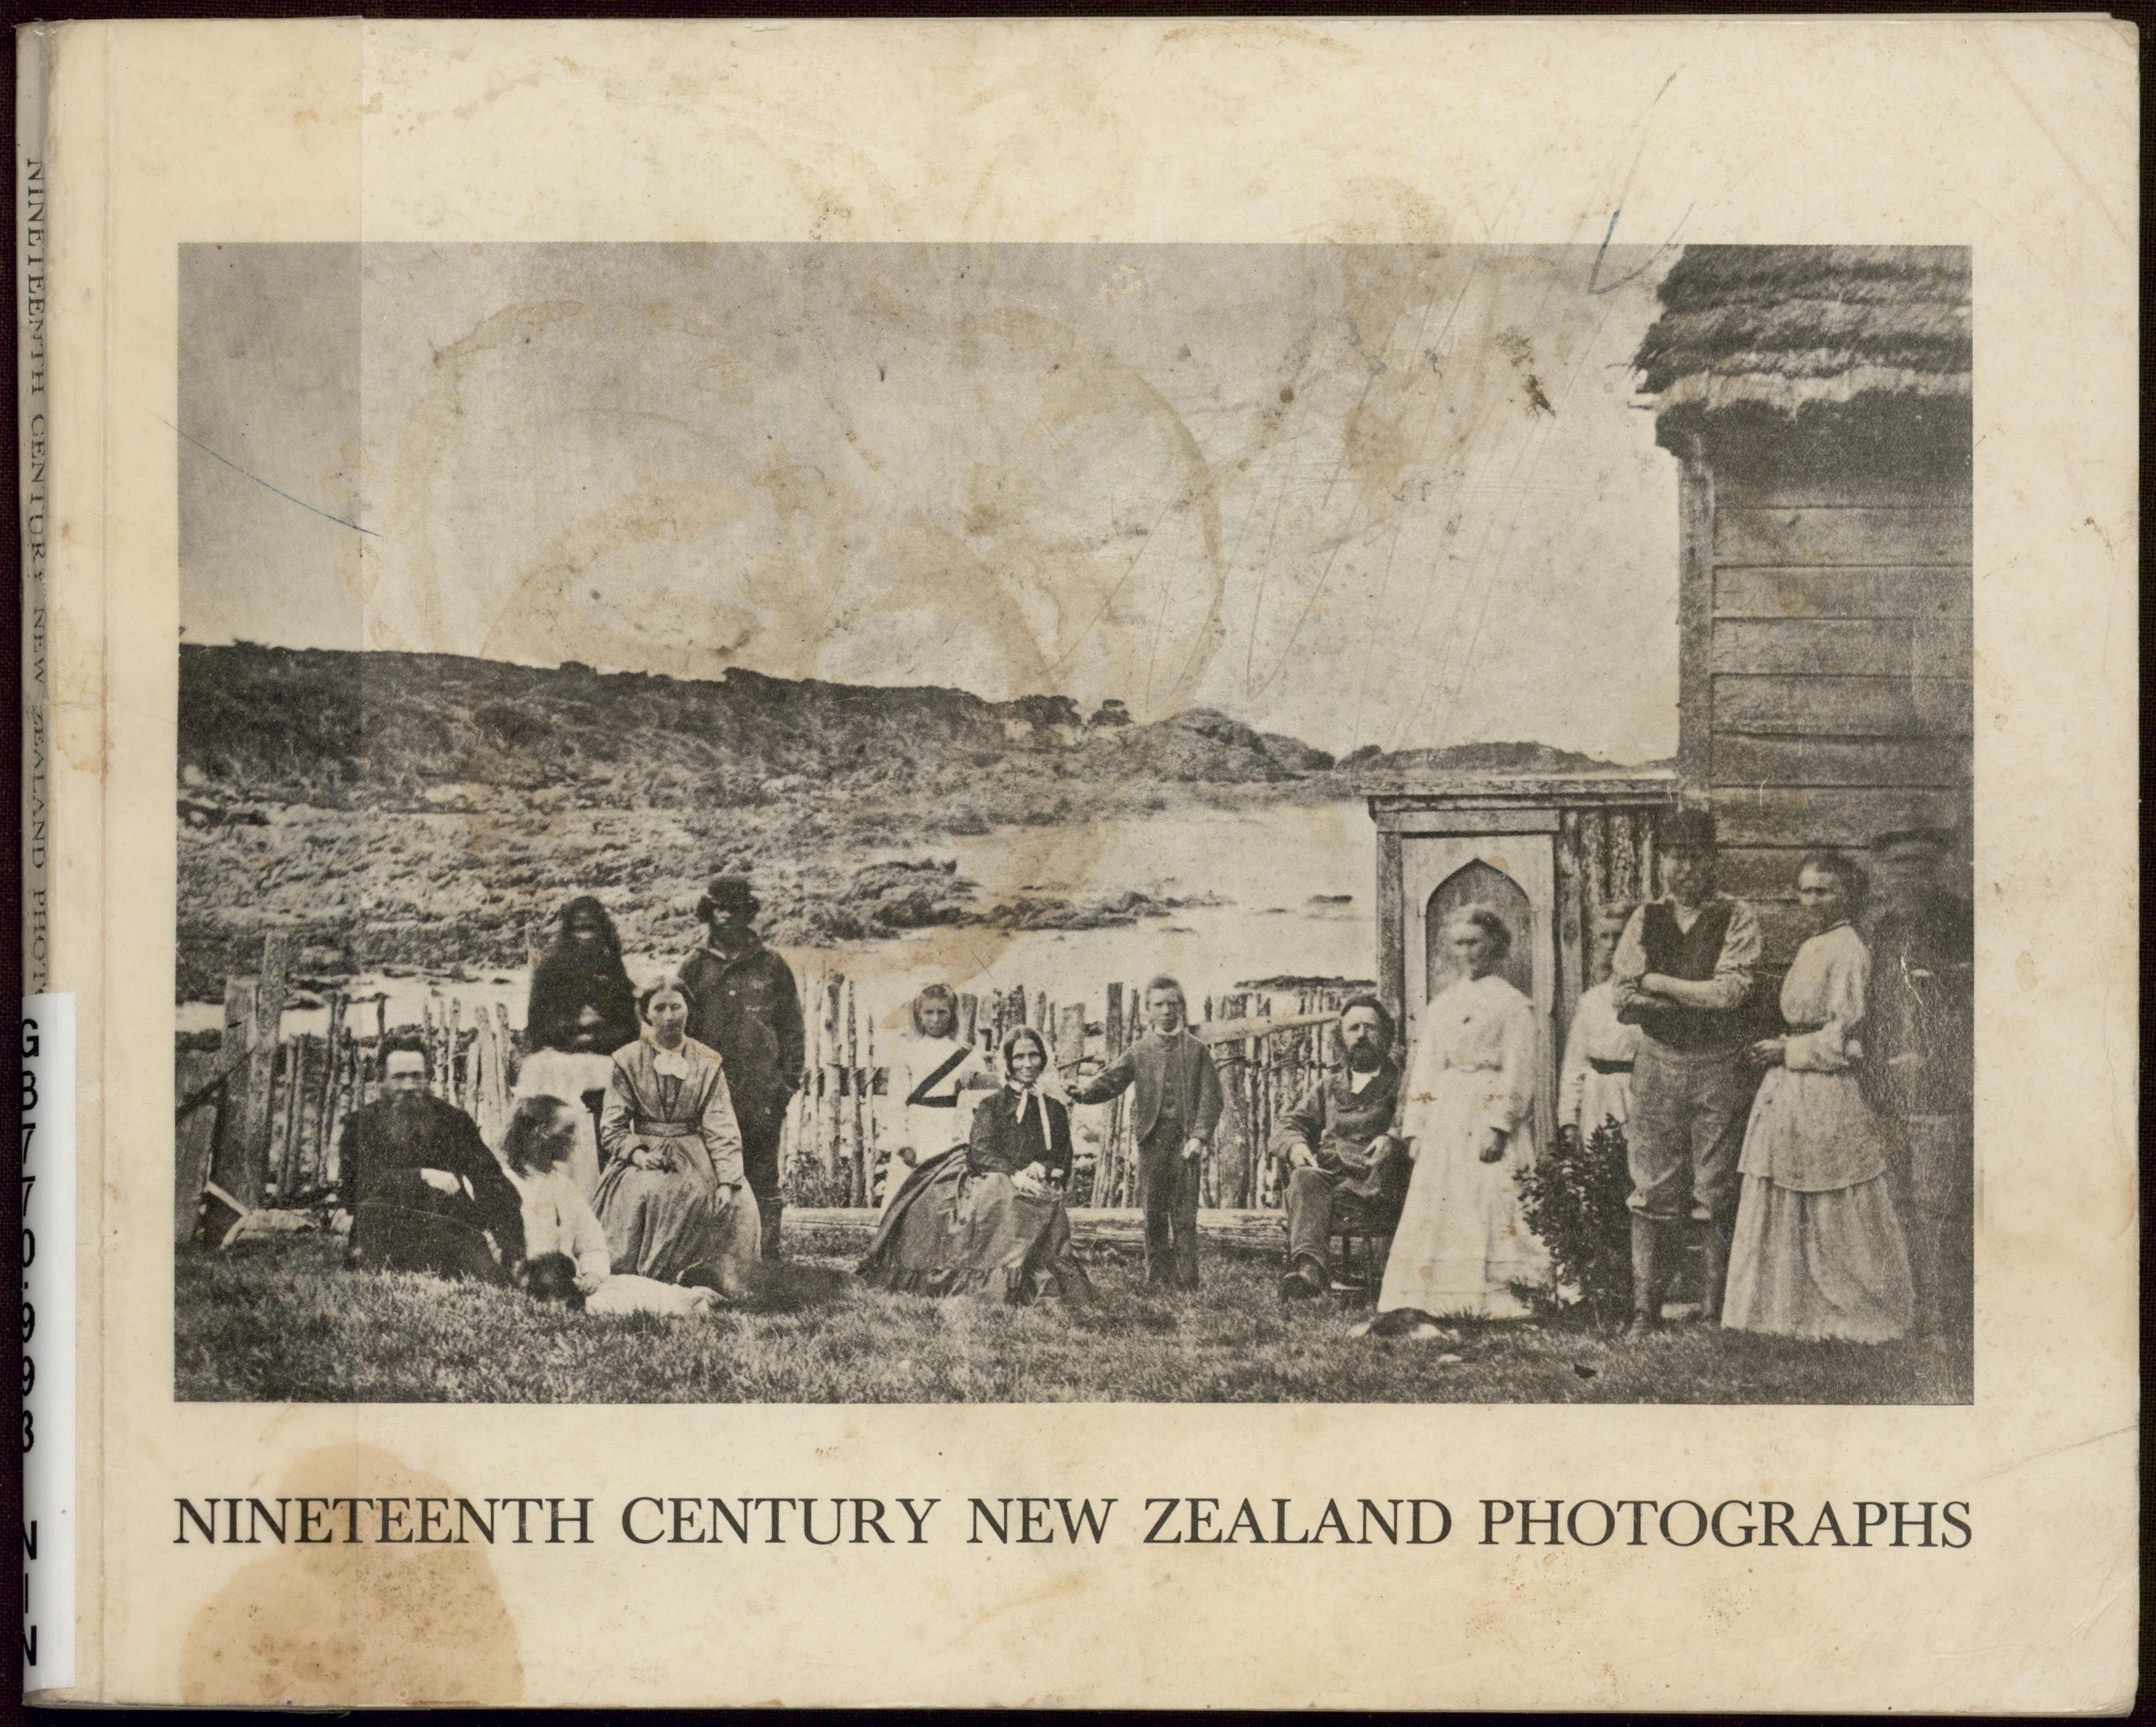 Catalogue cover image, showing a black and white historical photograph of a group of people gathered next to a wooden building, with a coastal landscape in the background. 